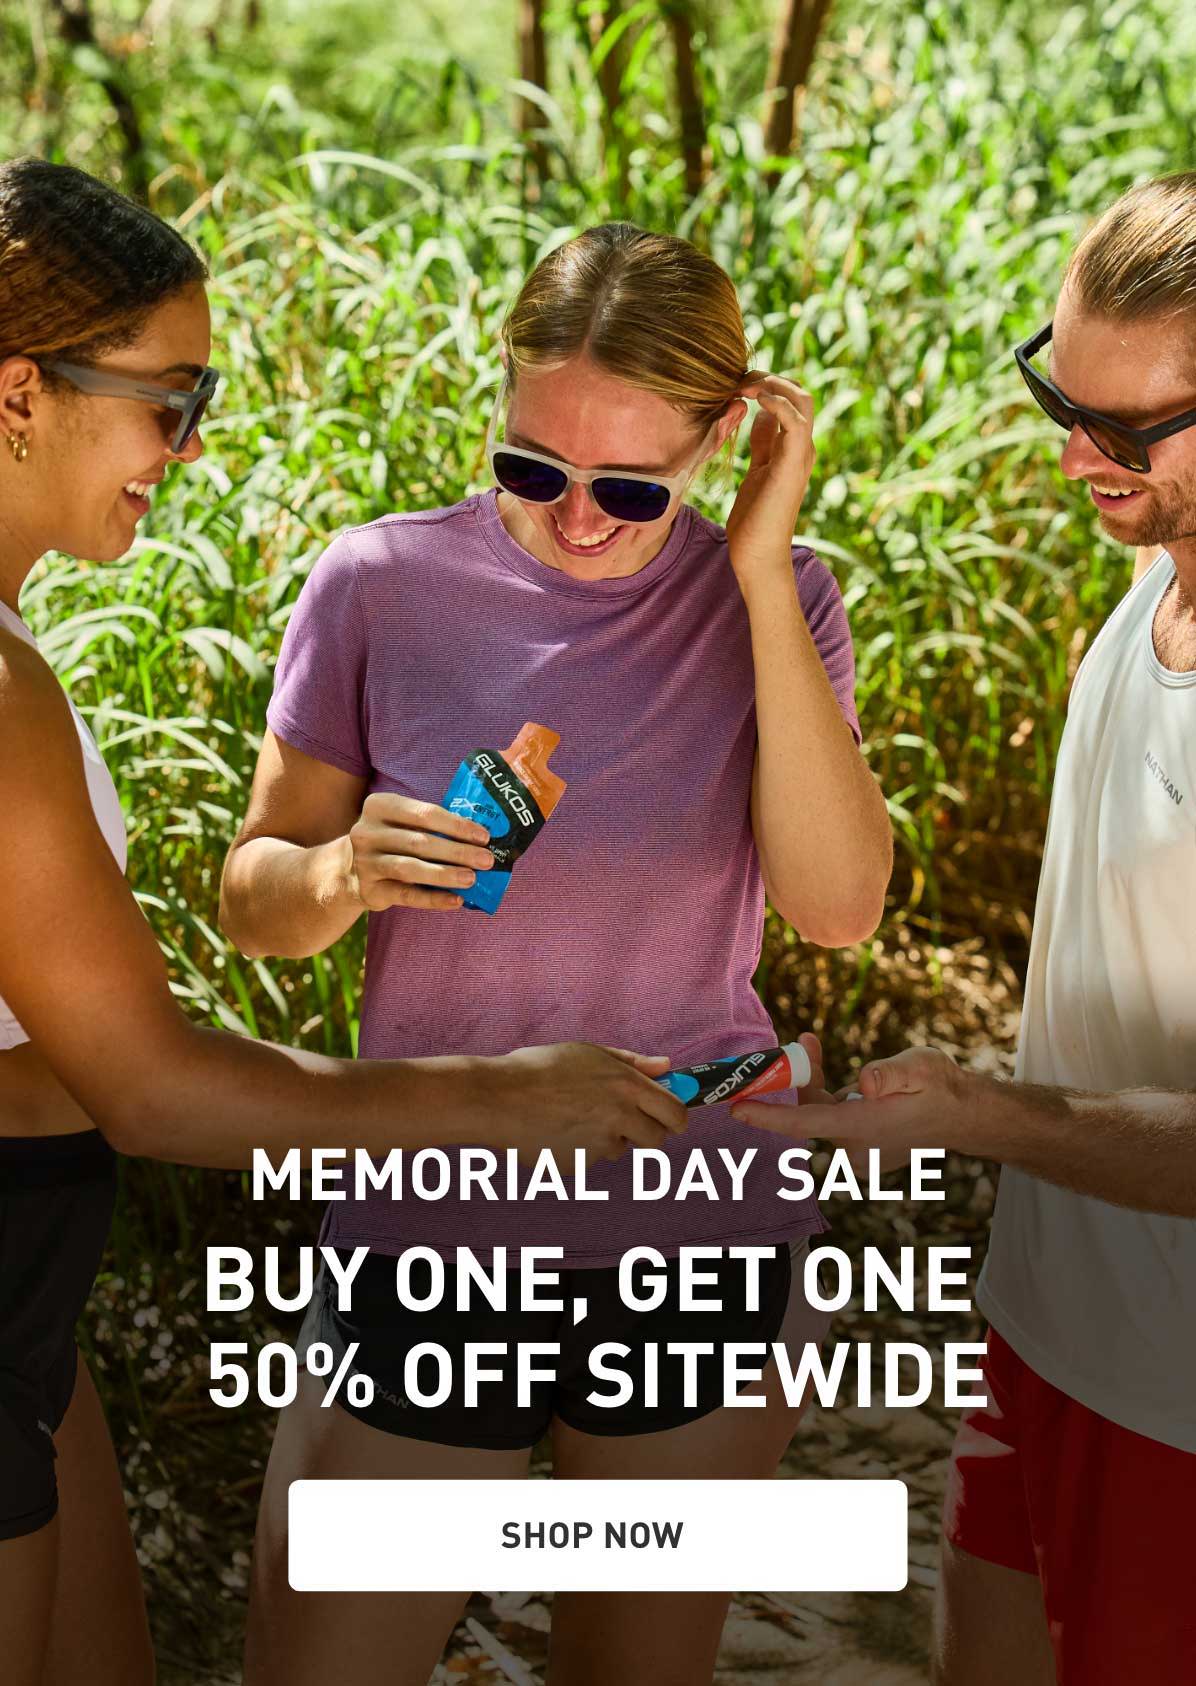 Memorial Day Sale - Buy One, Get One 50% Off Sitewide - Shop Now